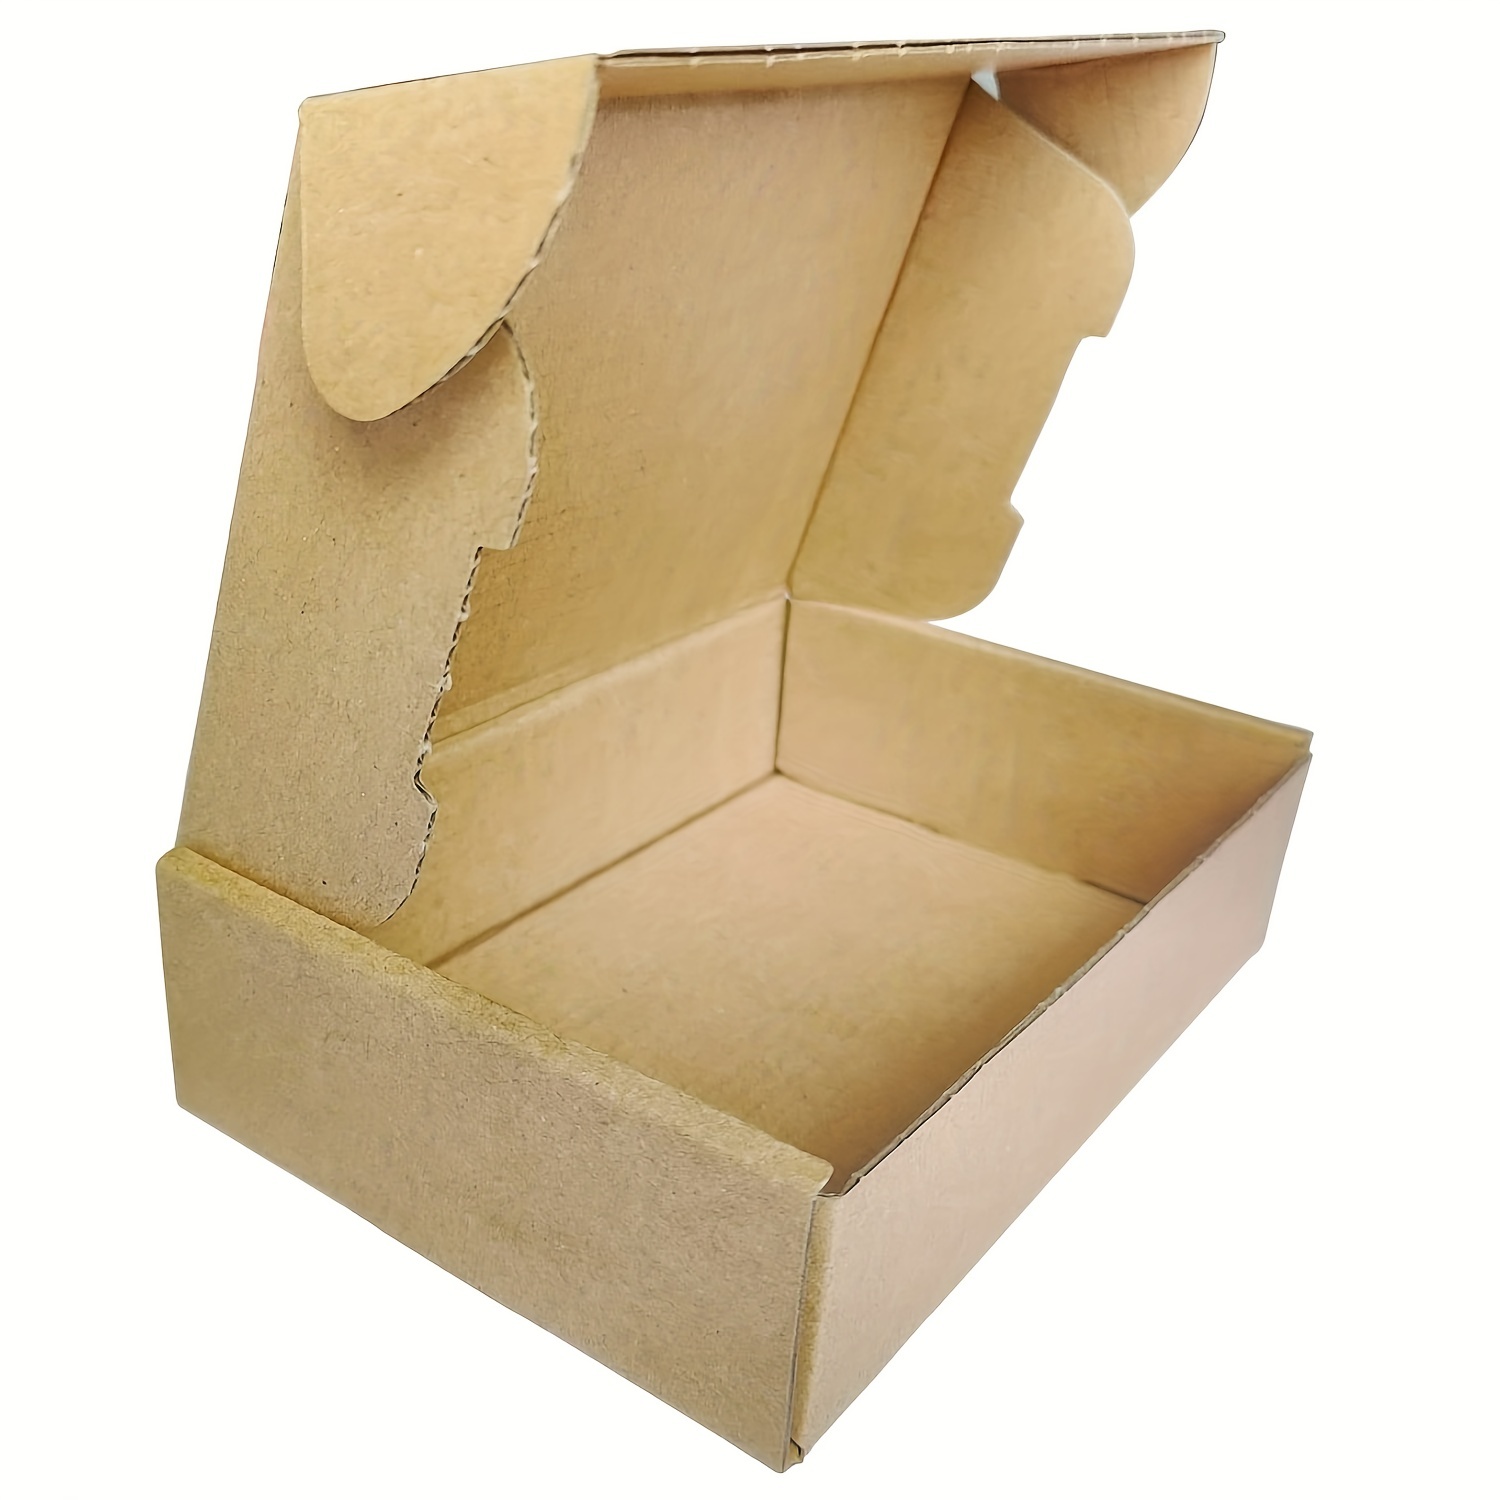  Edenseelake Cardboard Boxes 8 x 6 x 4 inches Small Shipping  Boxes, 25 Pack : Office Products